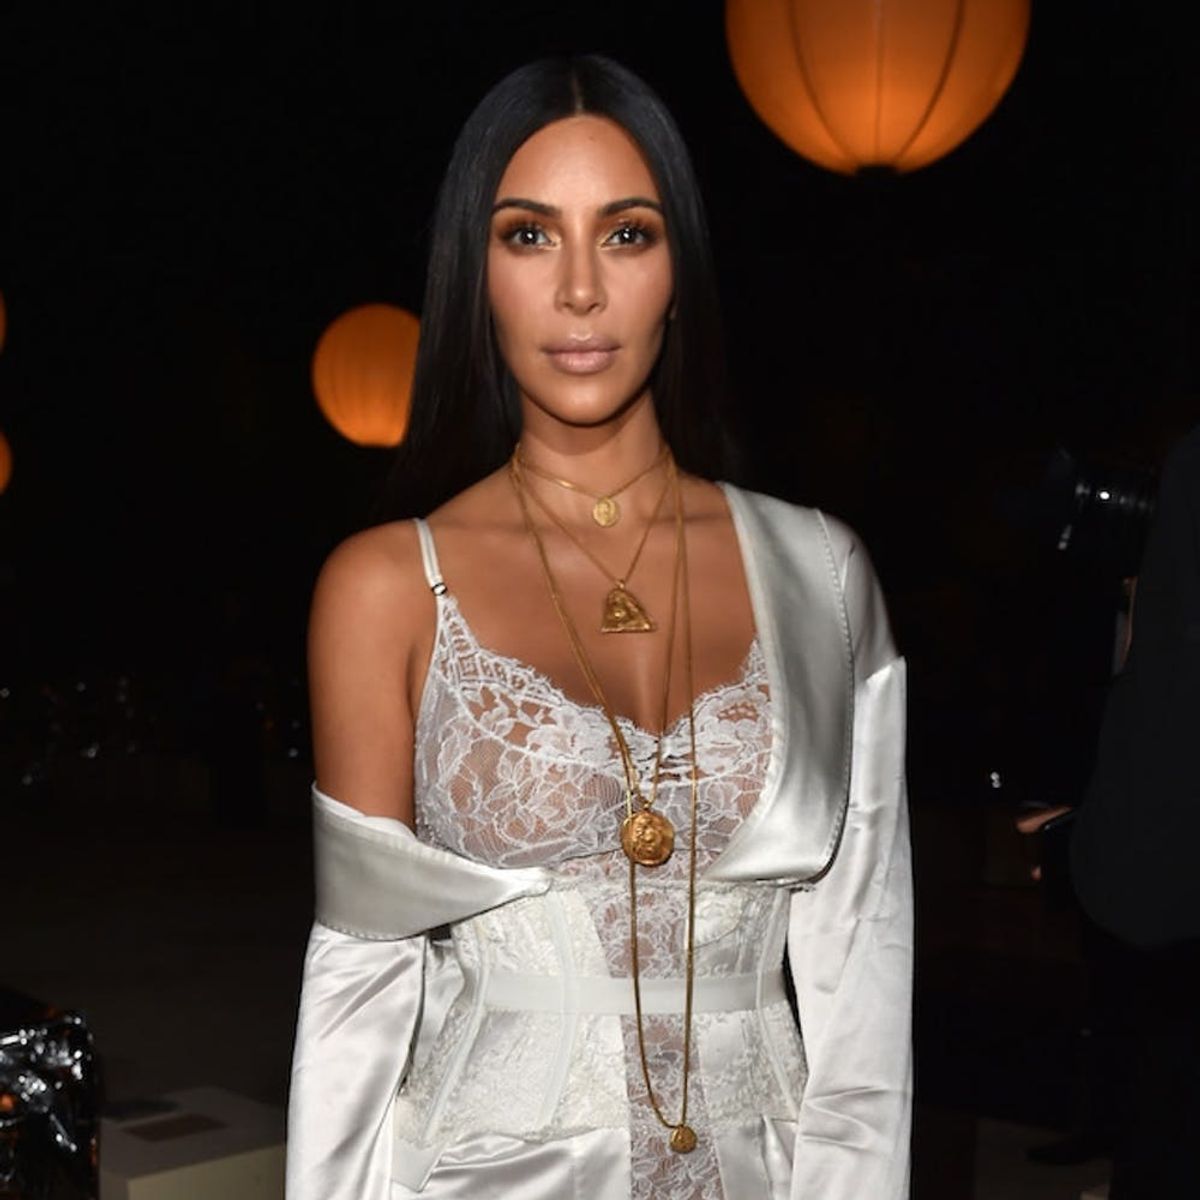 Morning Buzz! Kim Kardashian Returns to Social Media for the First Time Since Paris Robbery + More